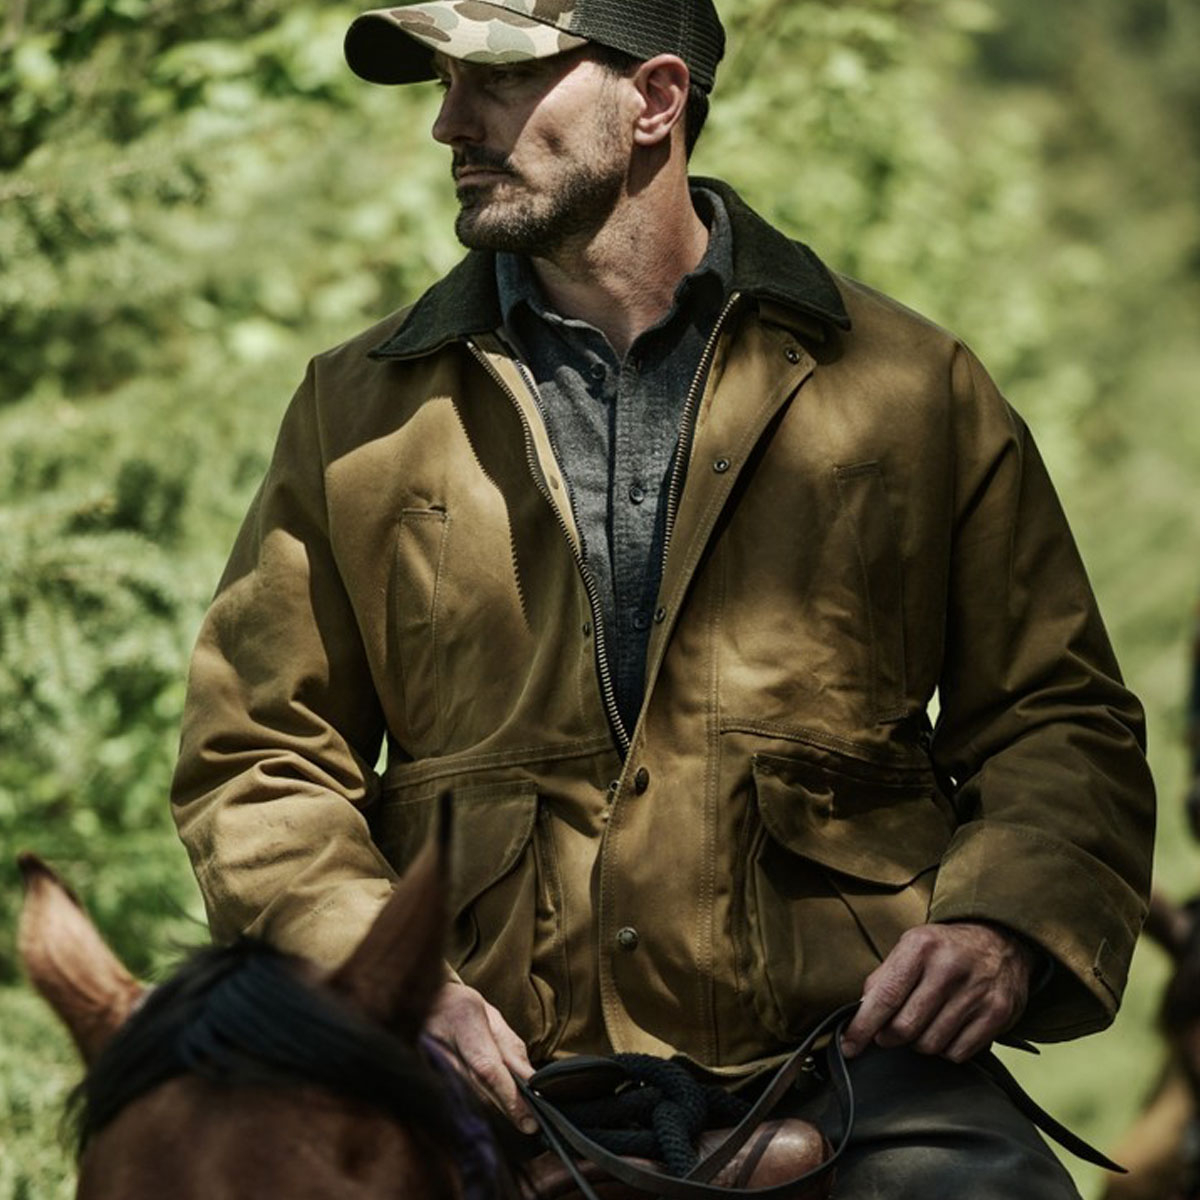 Filson Tin Cloth Field Jacket Dark Tan, Rugged, weather-resistant jacket for hunting, work or field